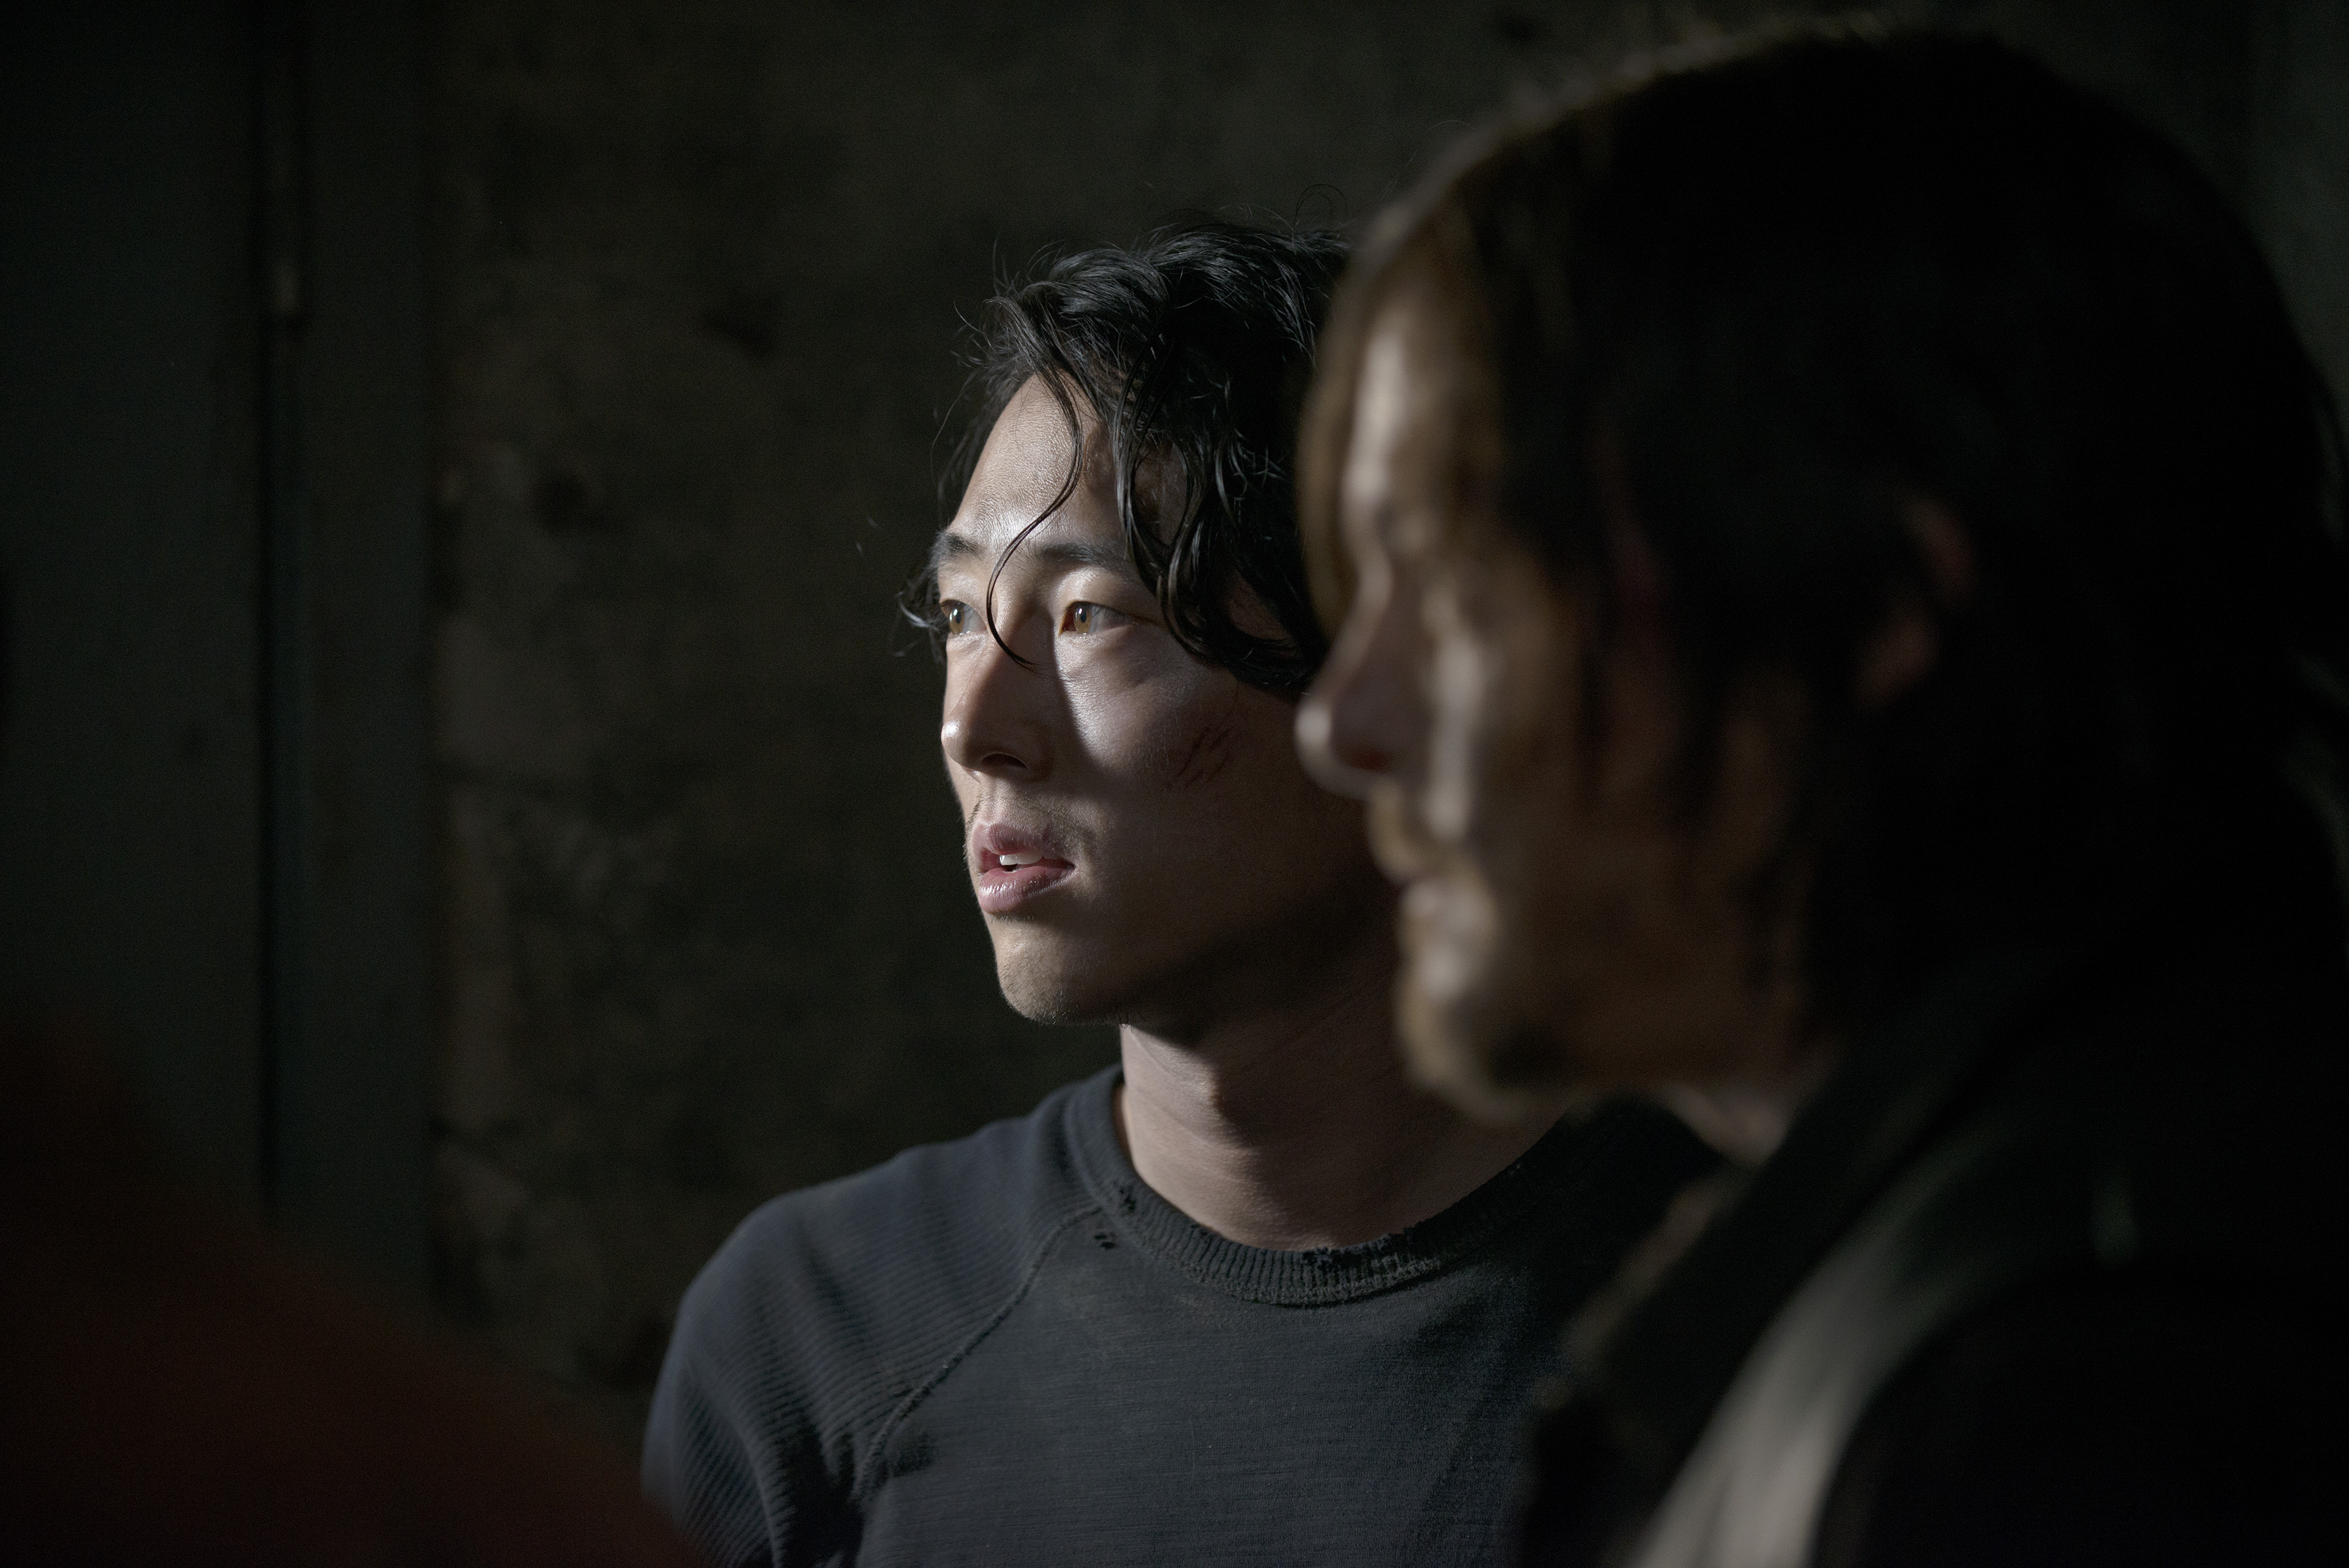 Steven Yeun as Glenn Rhee and Andrew Lincoln as Rick Grimes - The Walking Dead _ Season 5, Episode 1 - Photo Credit: Gene Page/AMC